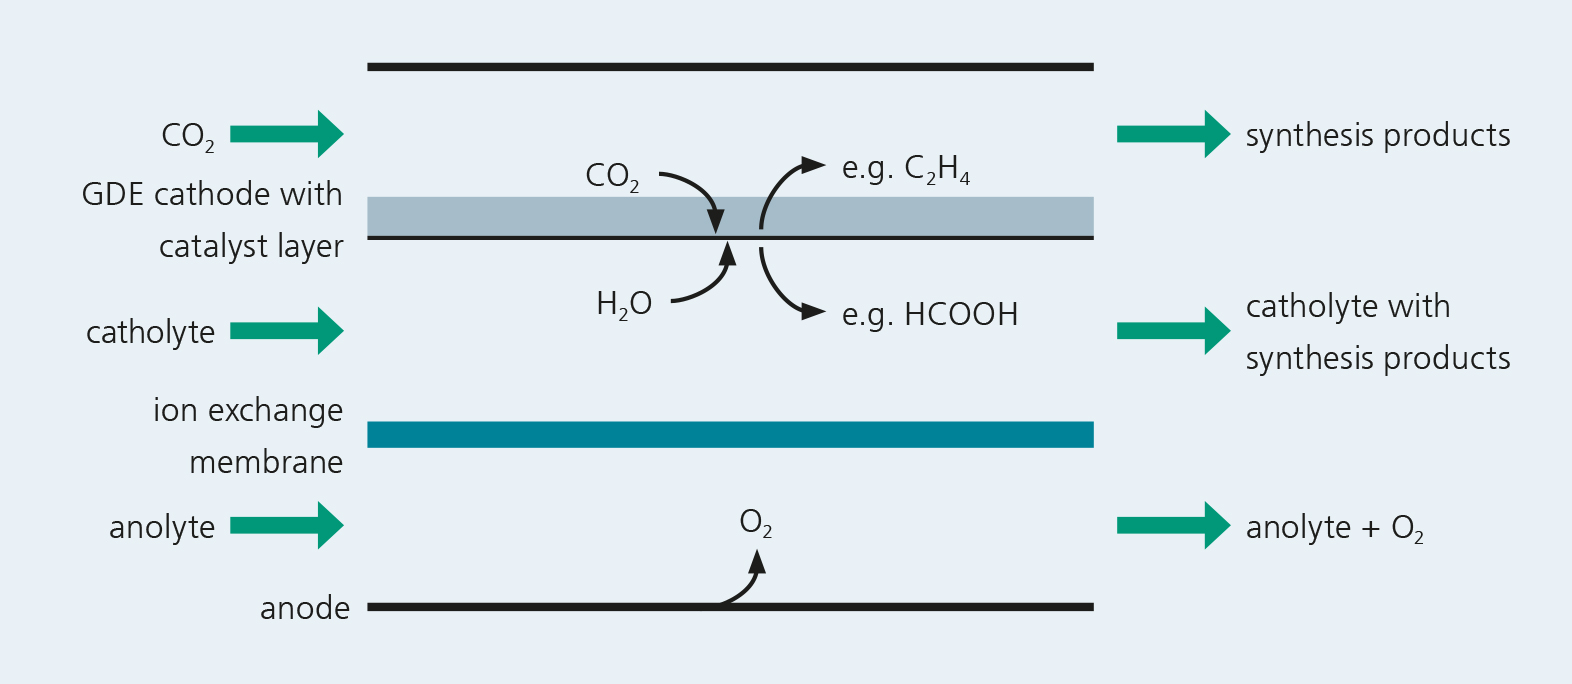 Schematic representation of the electrosynthesis of platform chemicals from CO2 and water